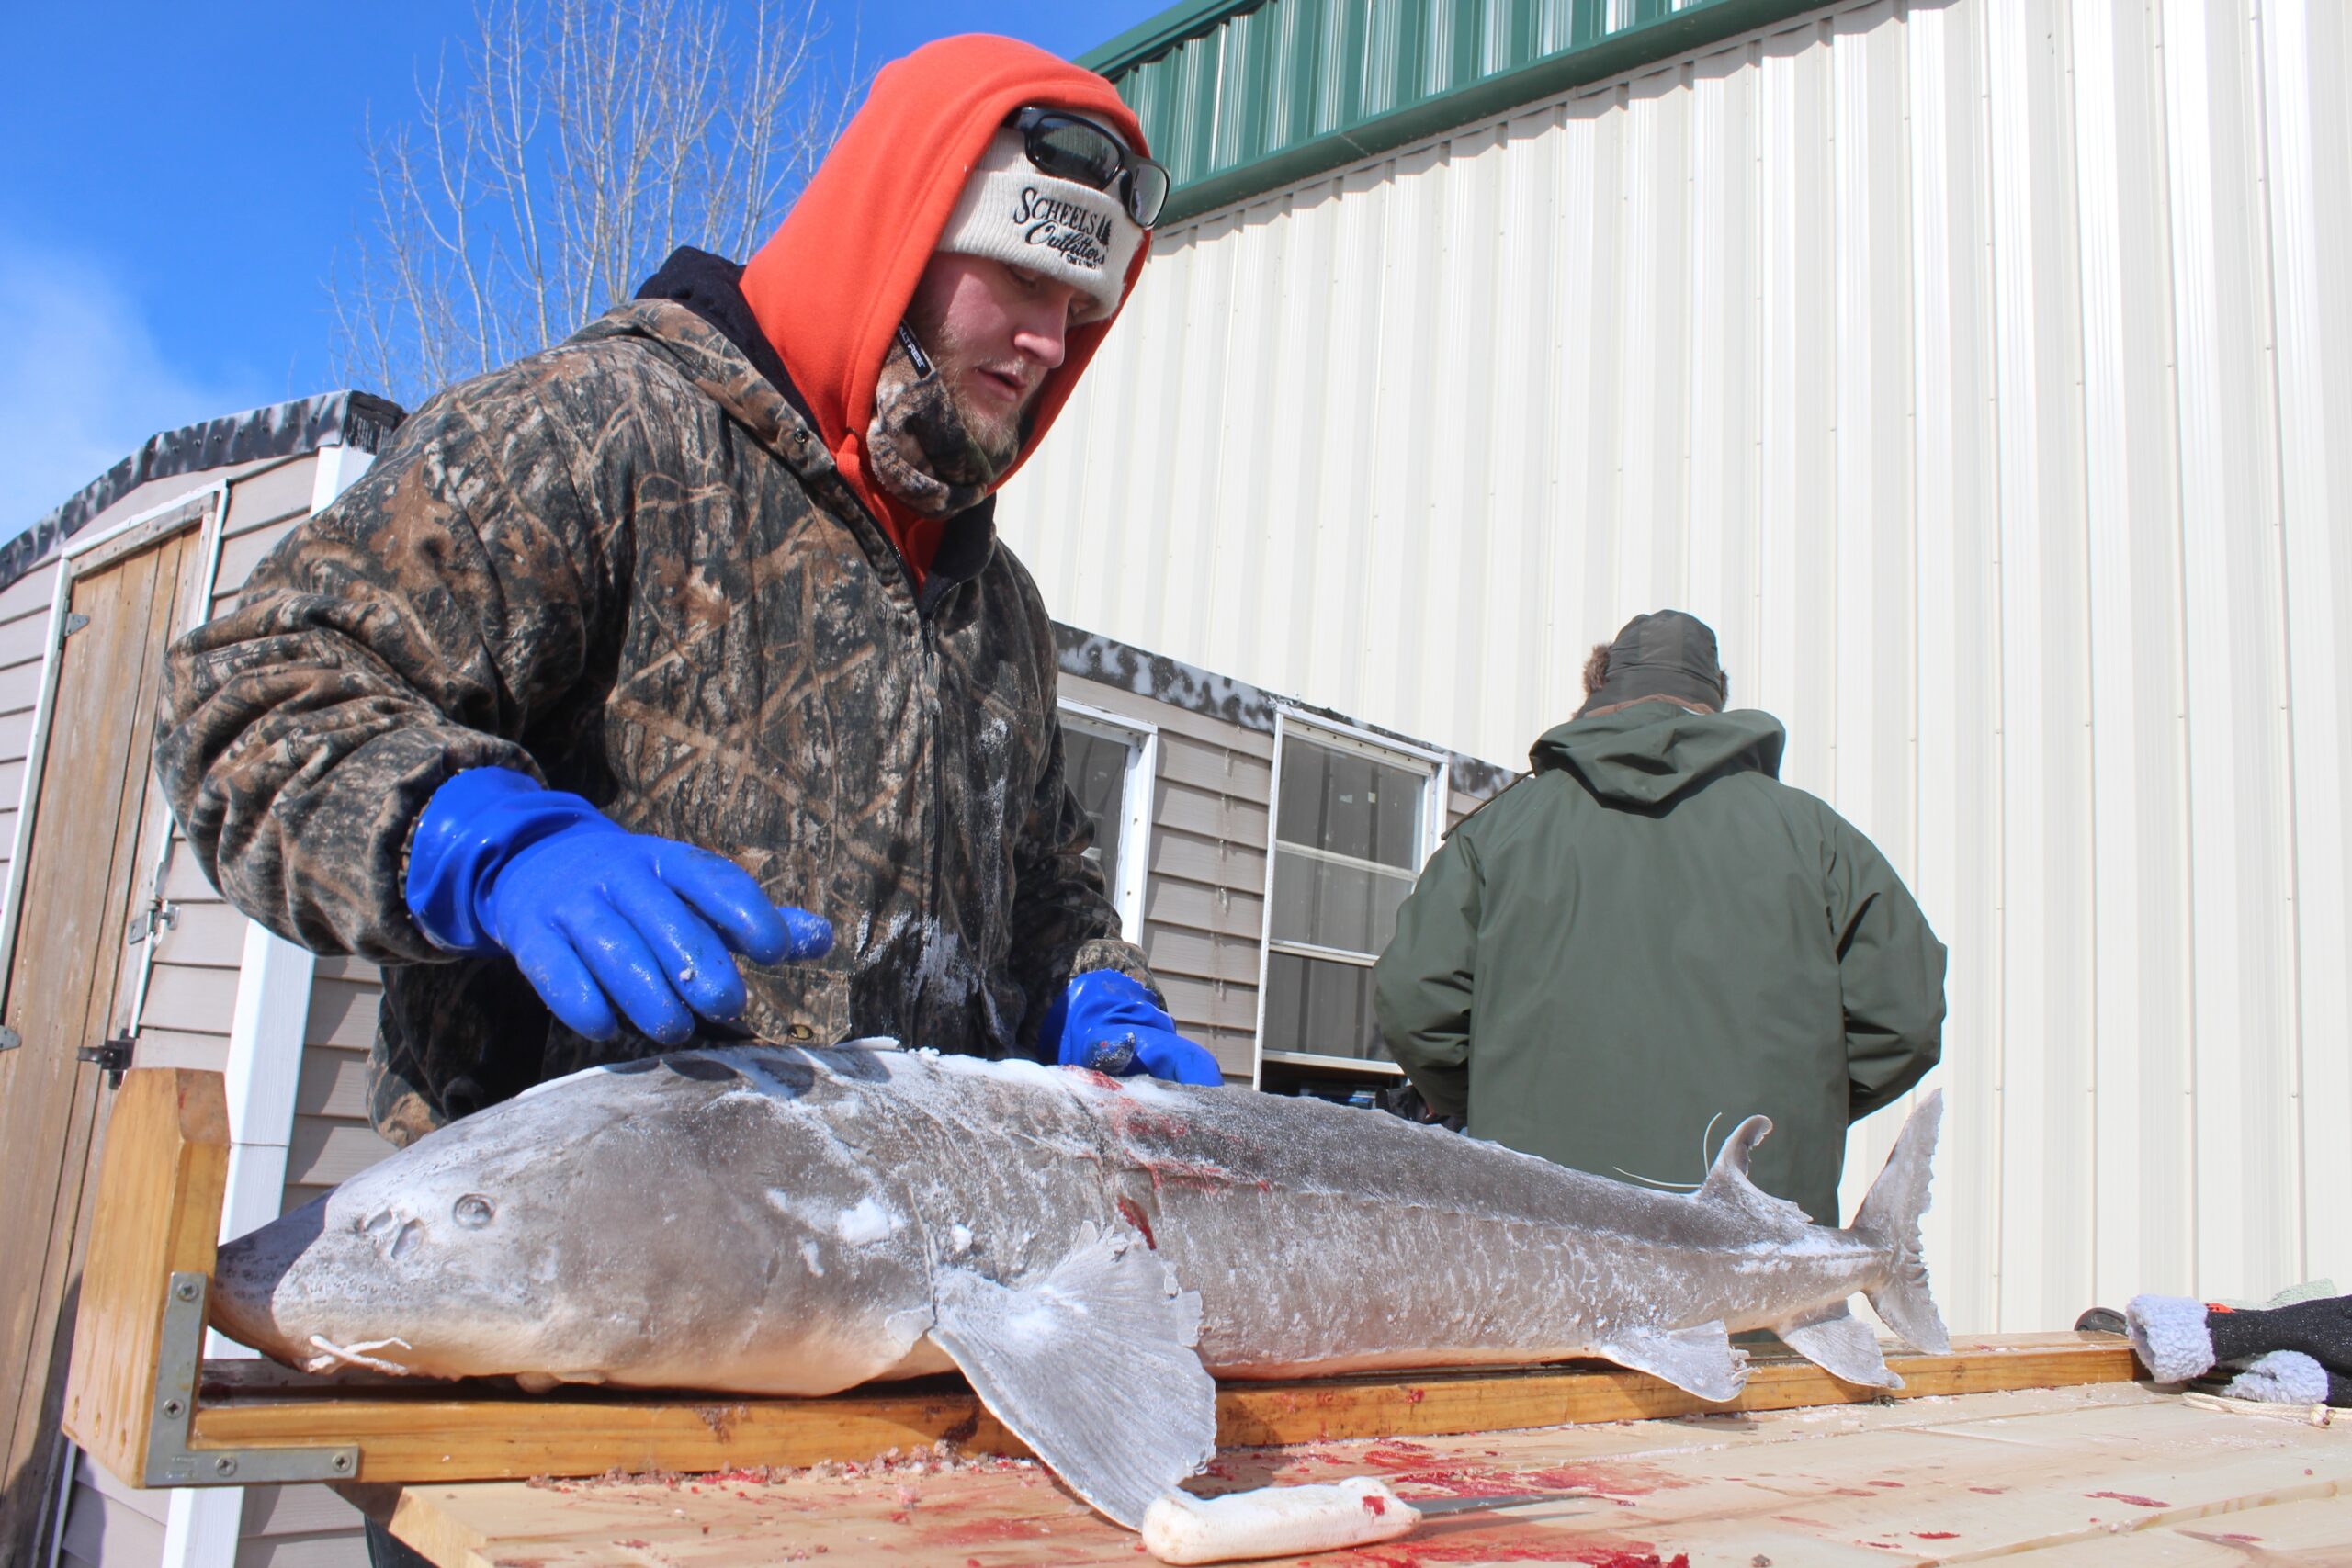 Wisconsin’s US lawmakers want to exempt state sturgeon from possible endangered designation